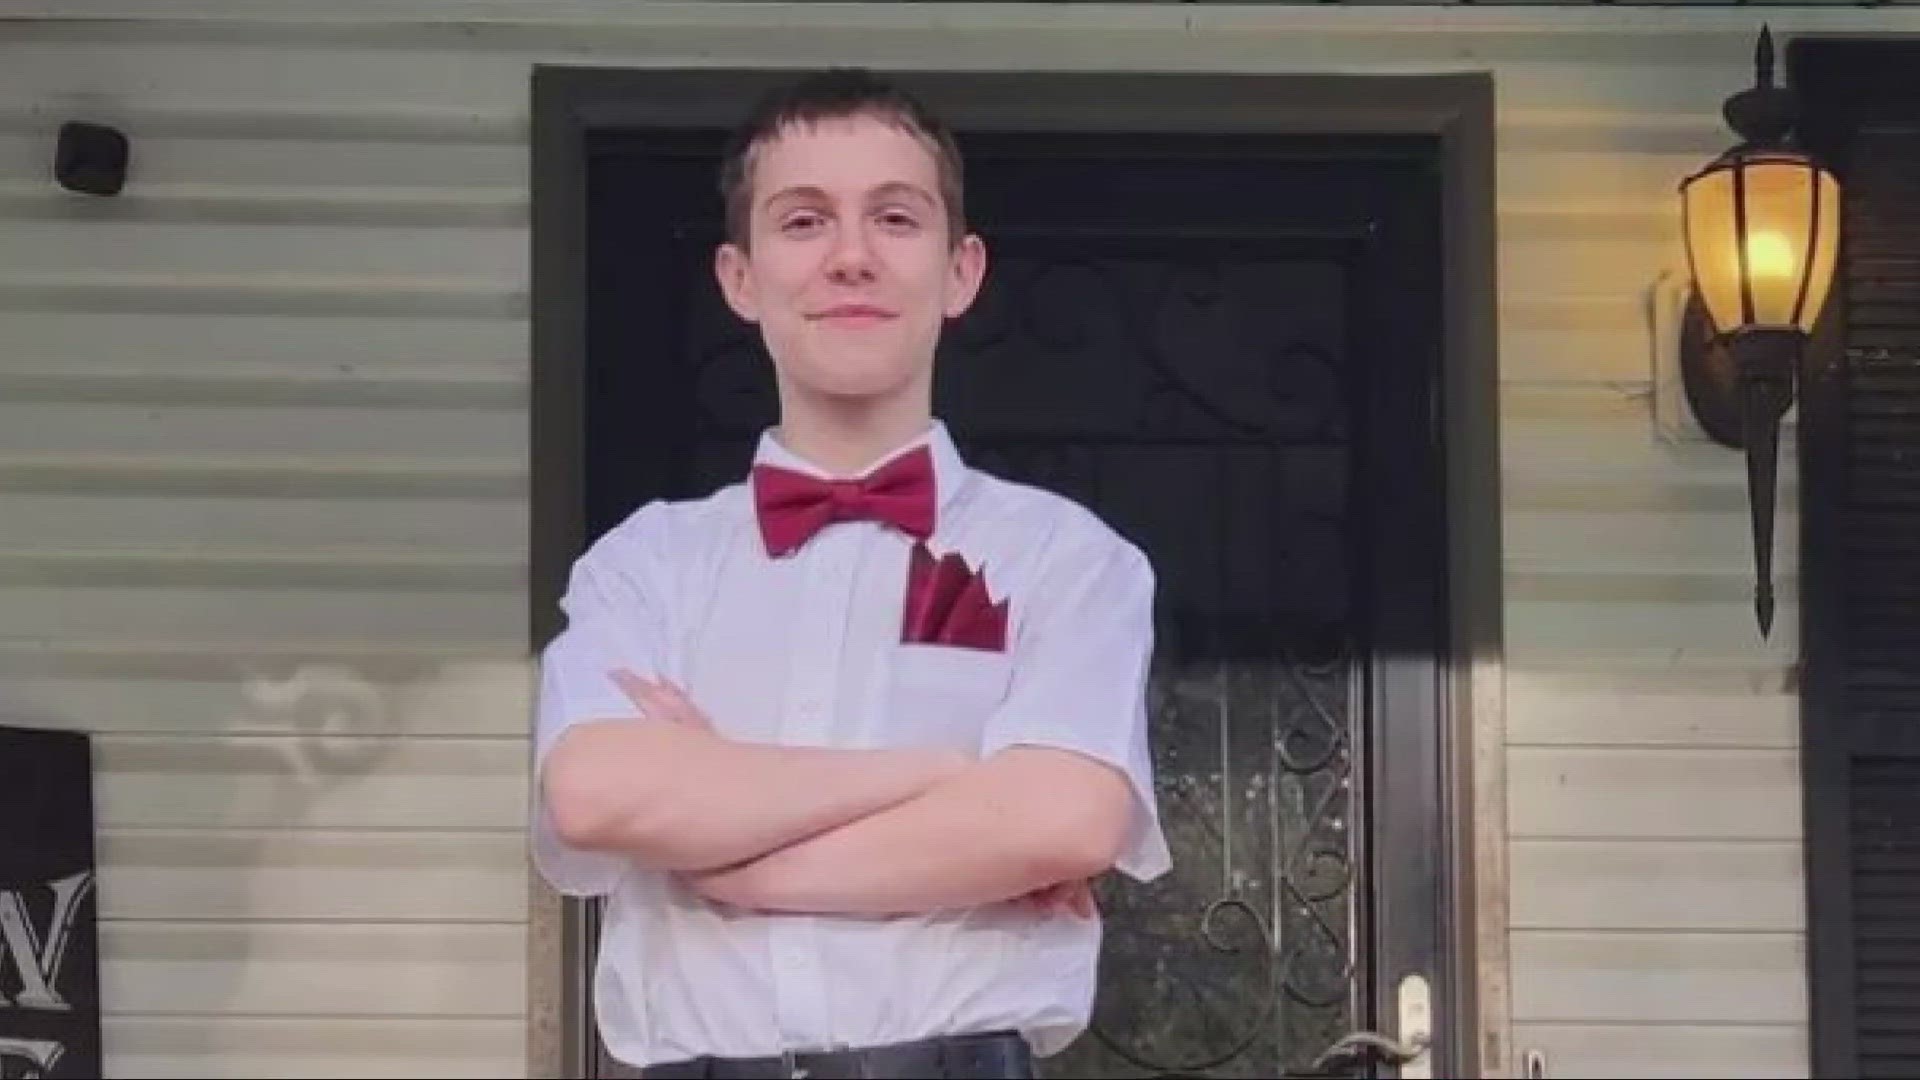 Jimmy Kennedy was killed in a crash while riding his bike home from school Friday.